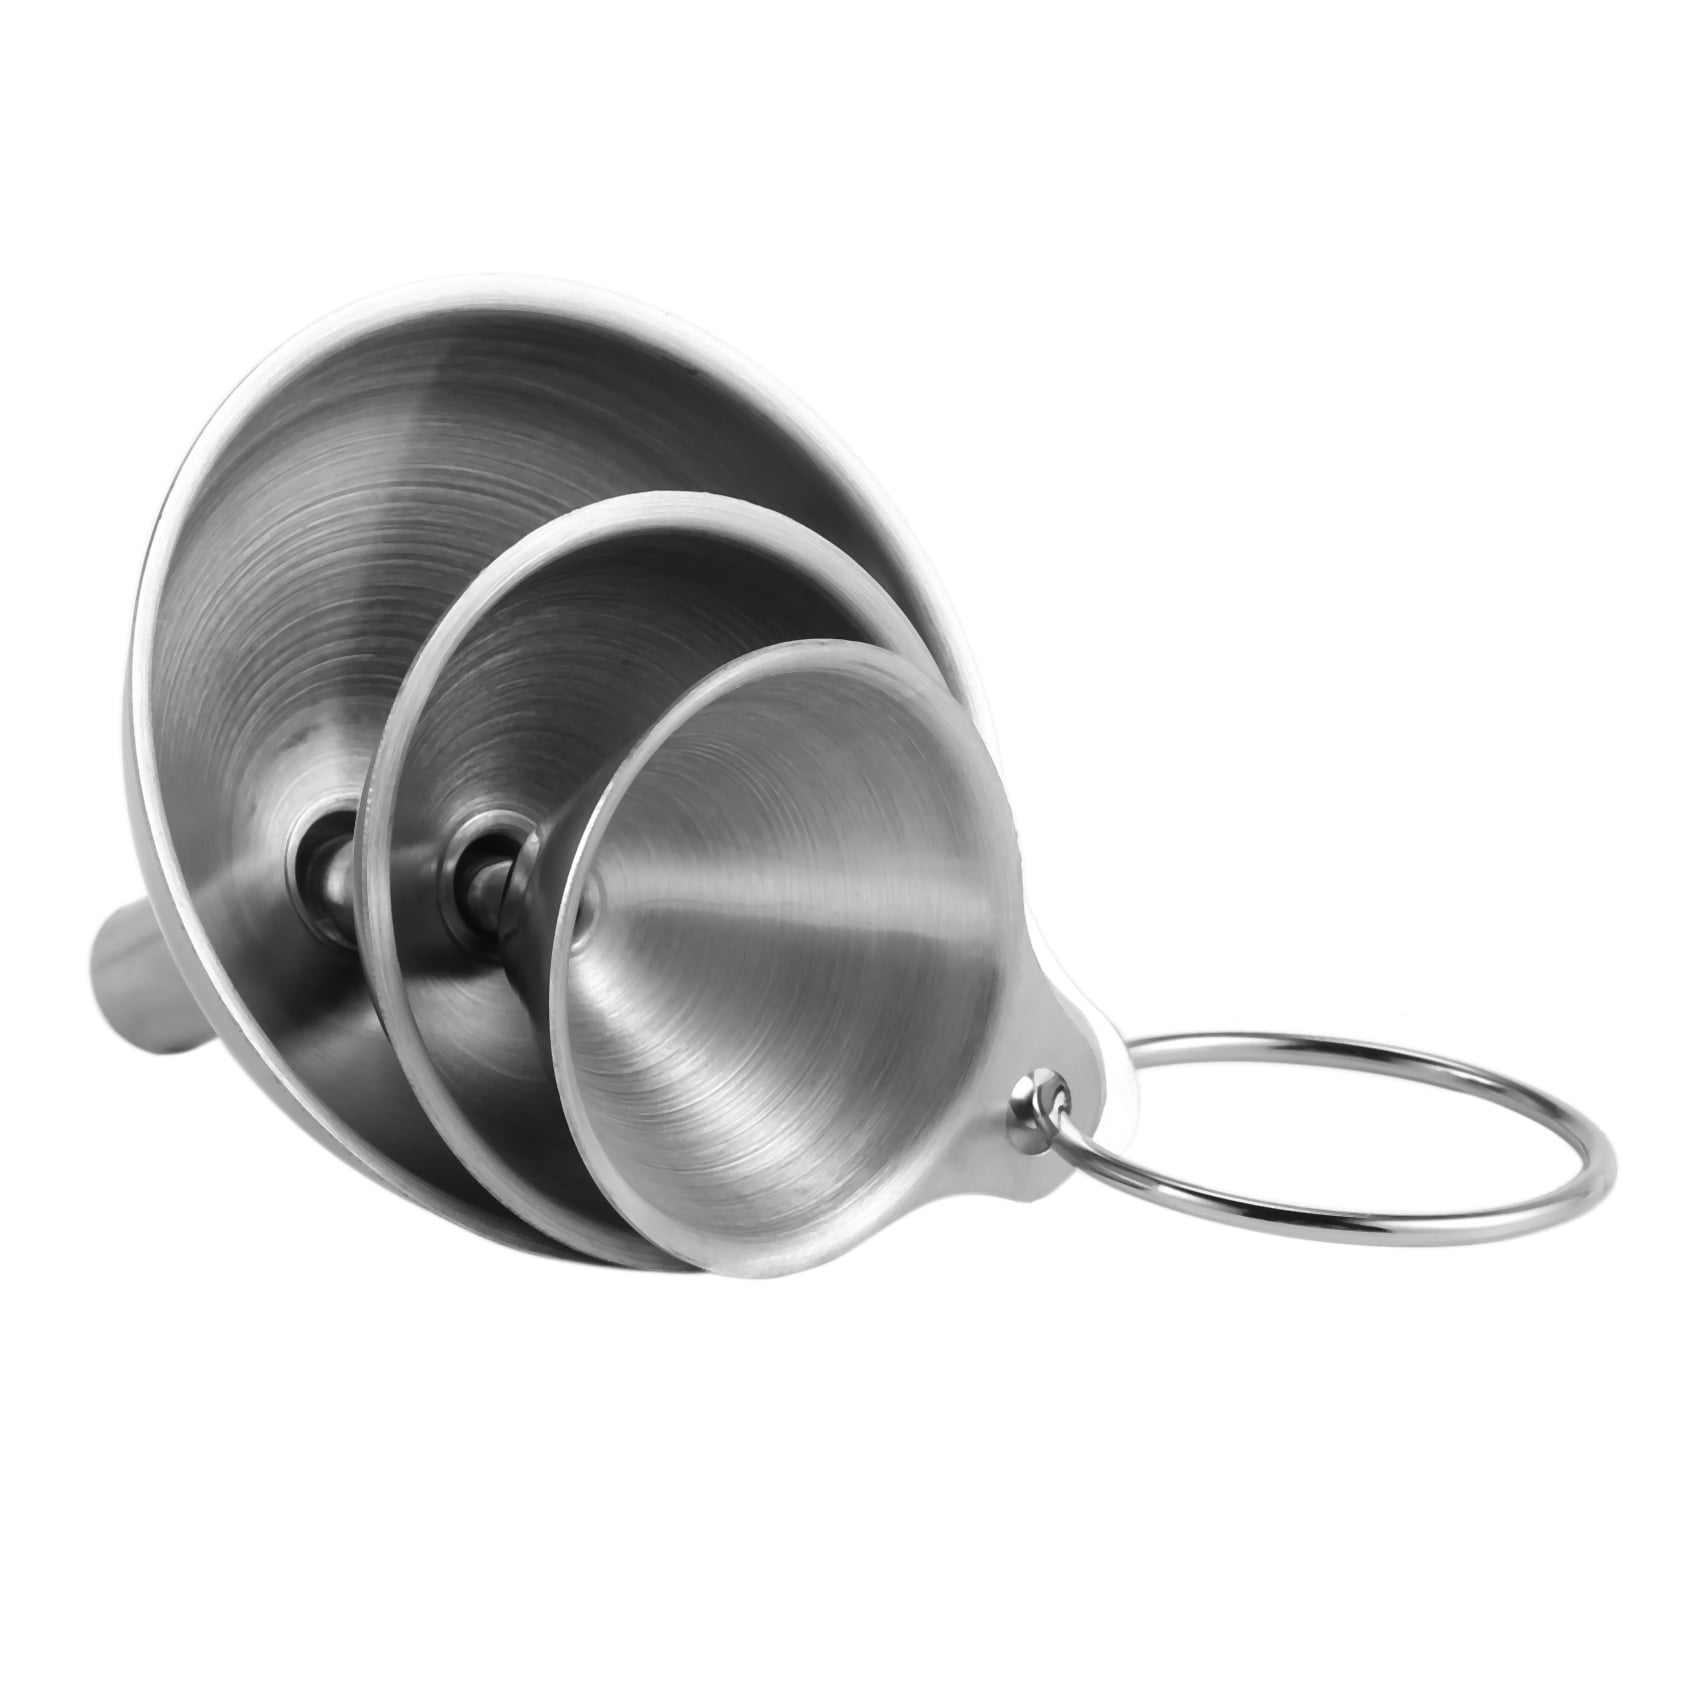 Details about   3pcs Stainless Steel Funnel Essentail Oil Water Spices Wine Flask Filter FunneTM 